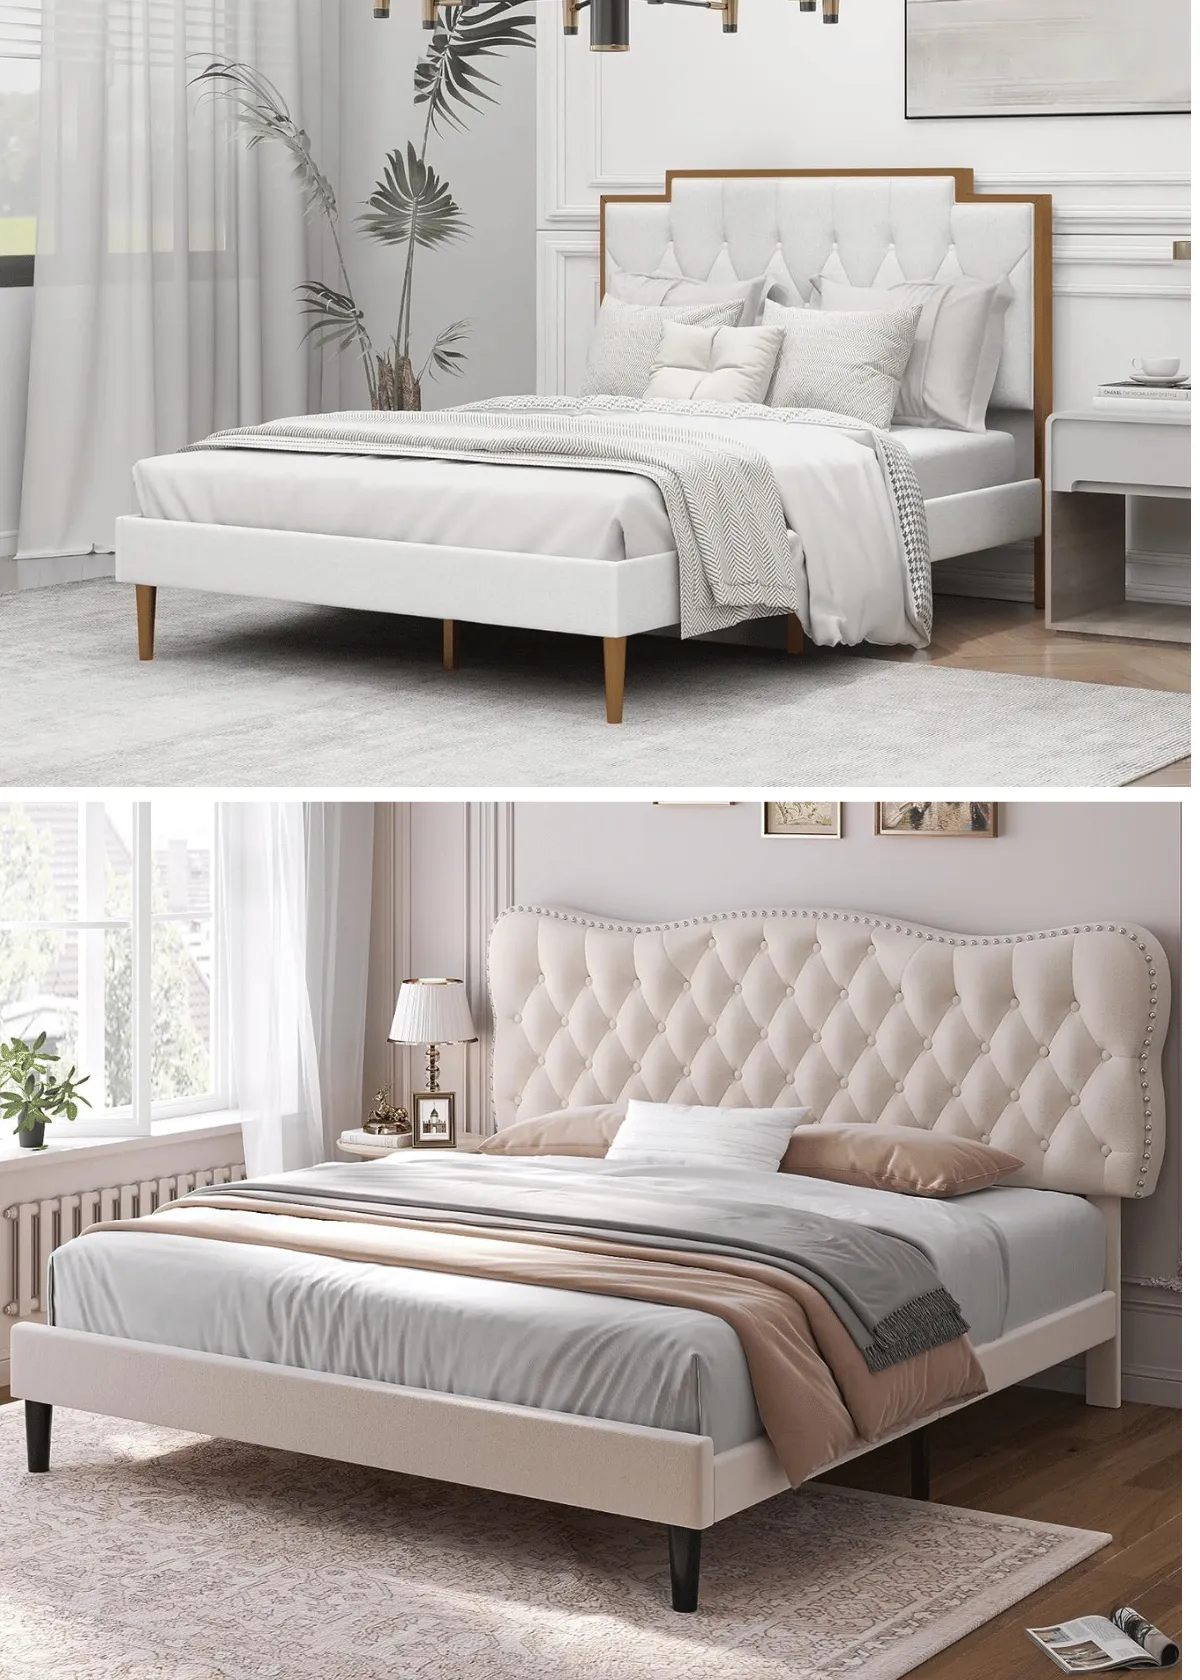 "Is the Cream Bed Frame the Best Choice For Your Room Style?"